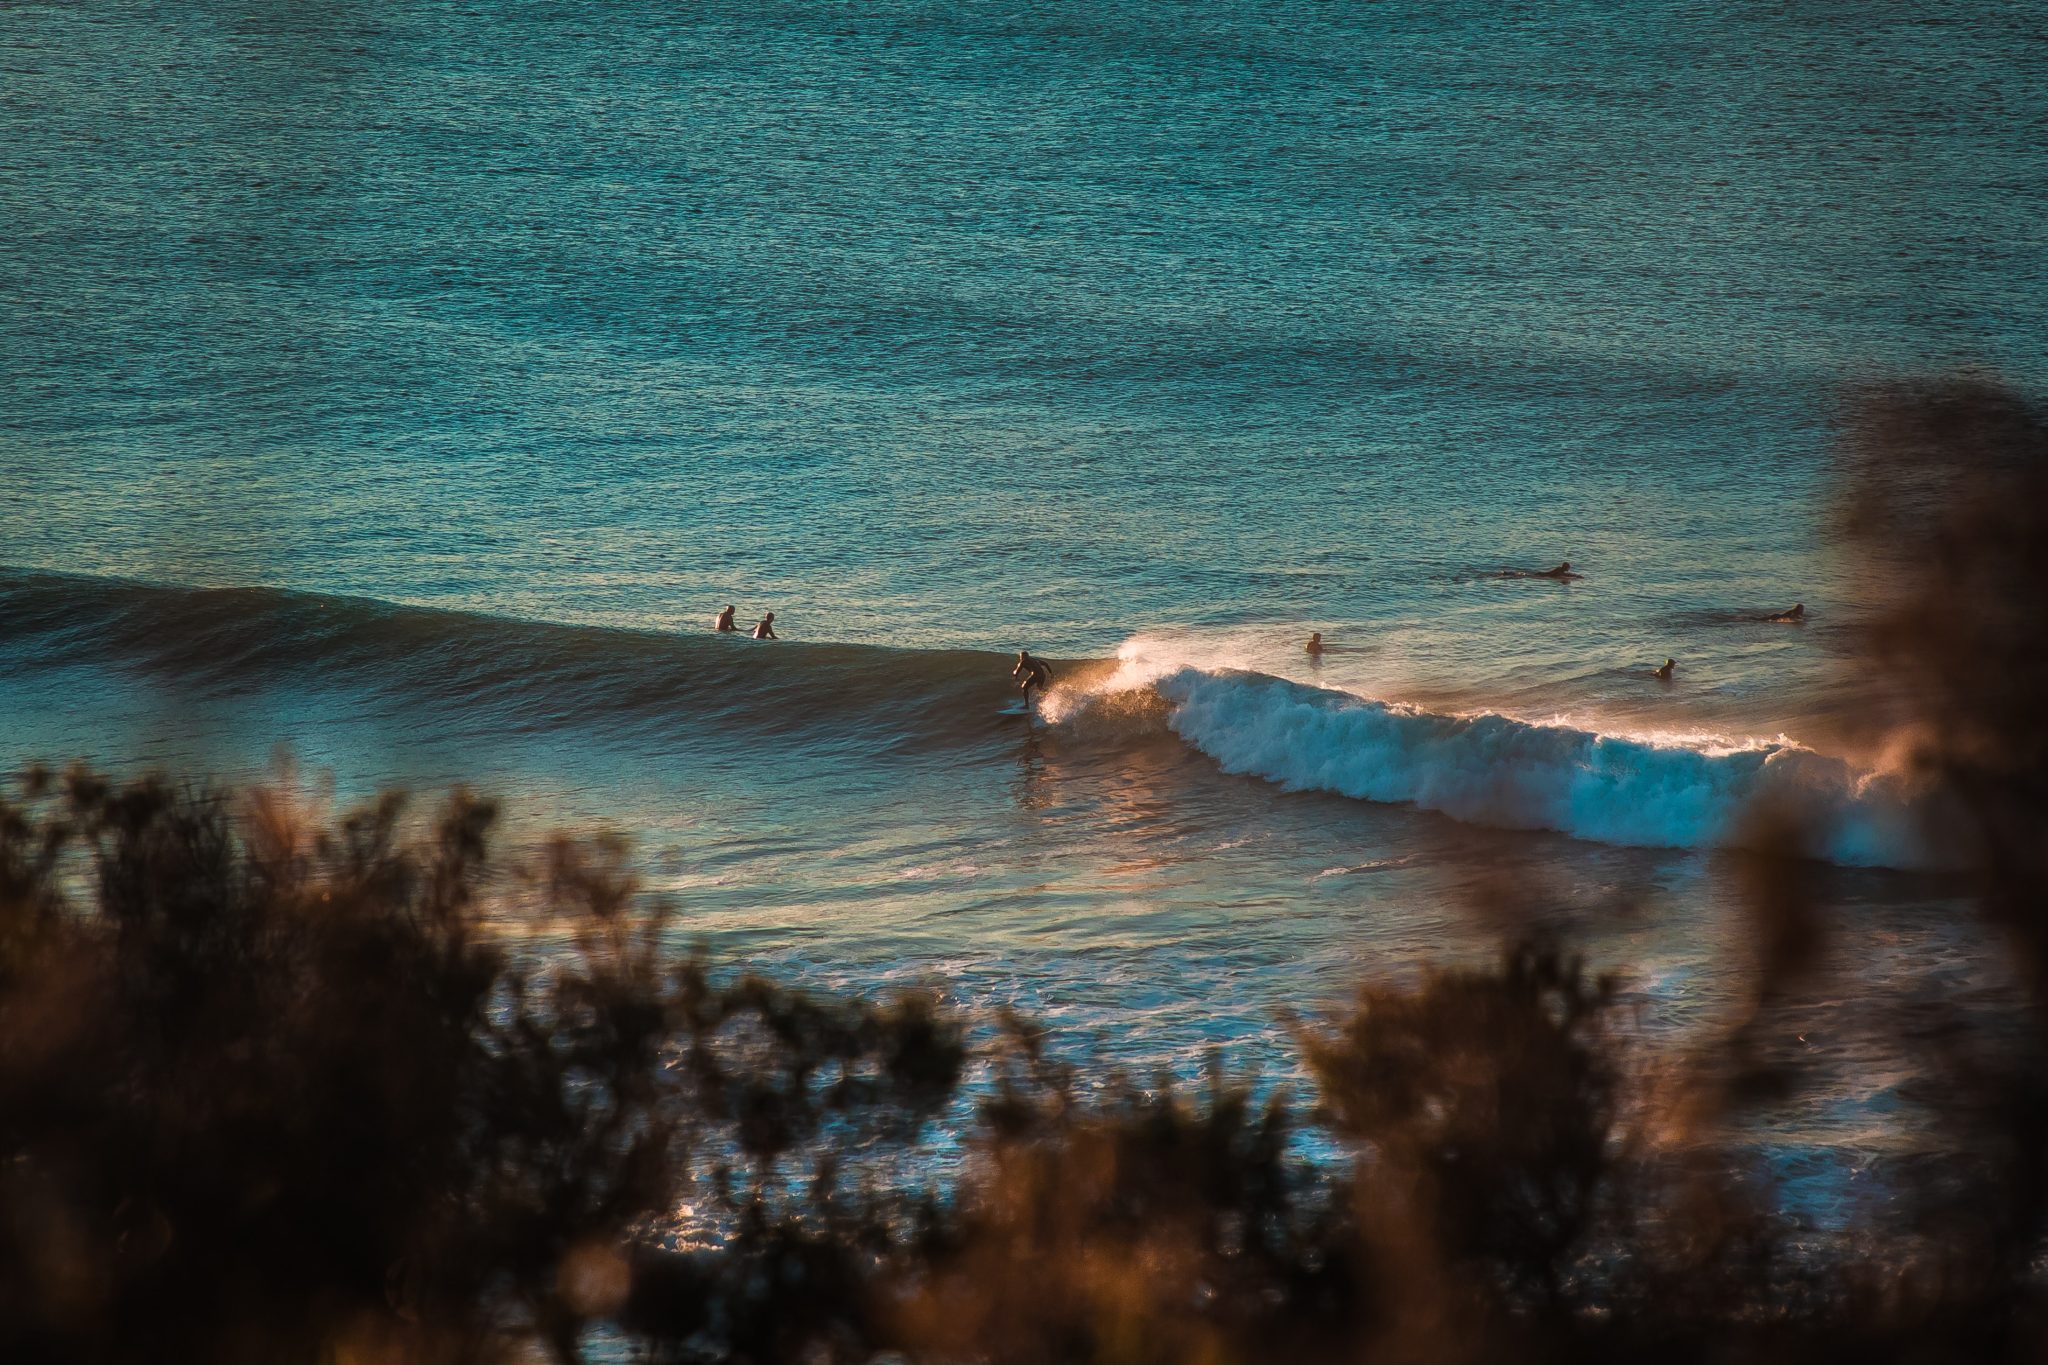 Pay a visit to the iconic Bells Beach